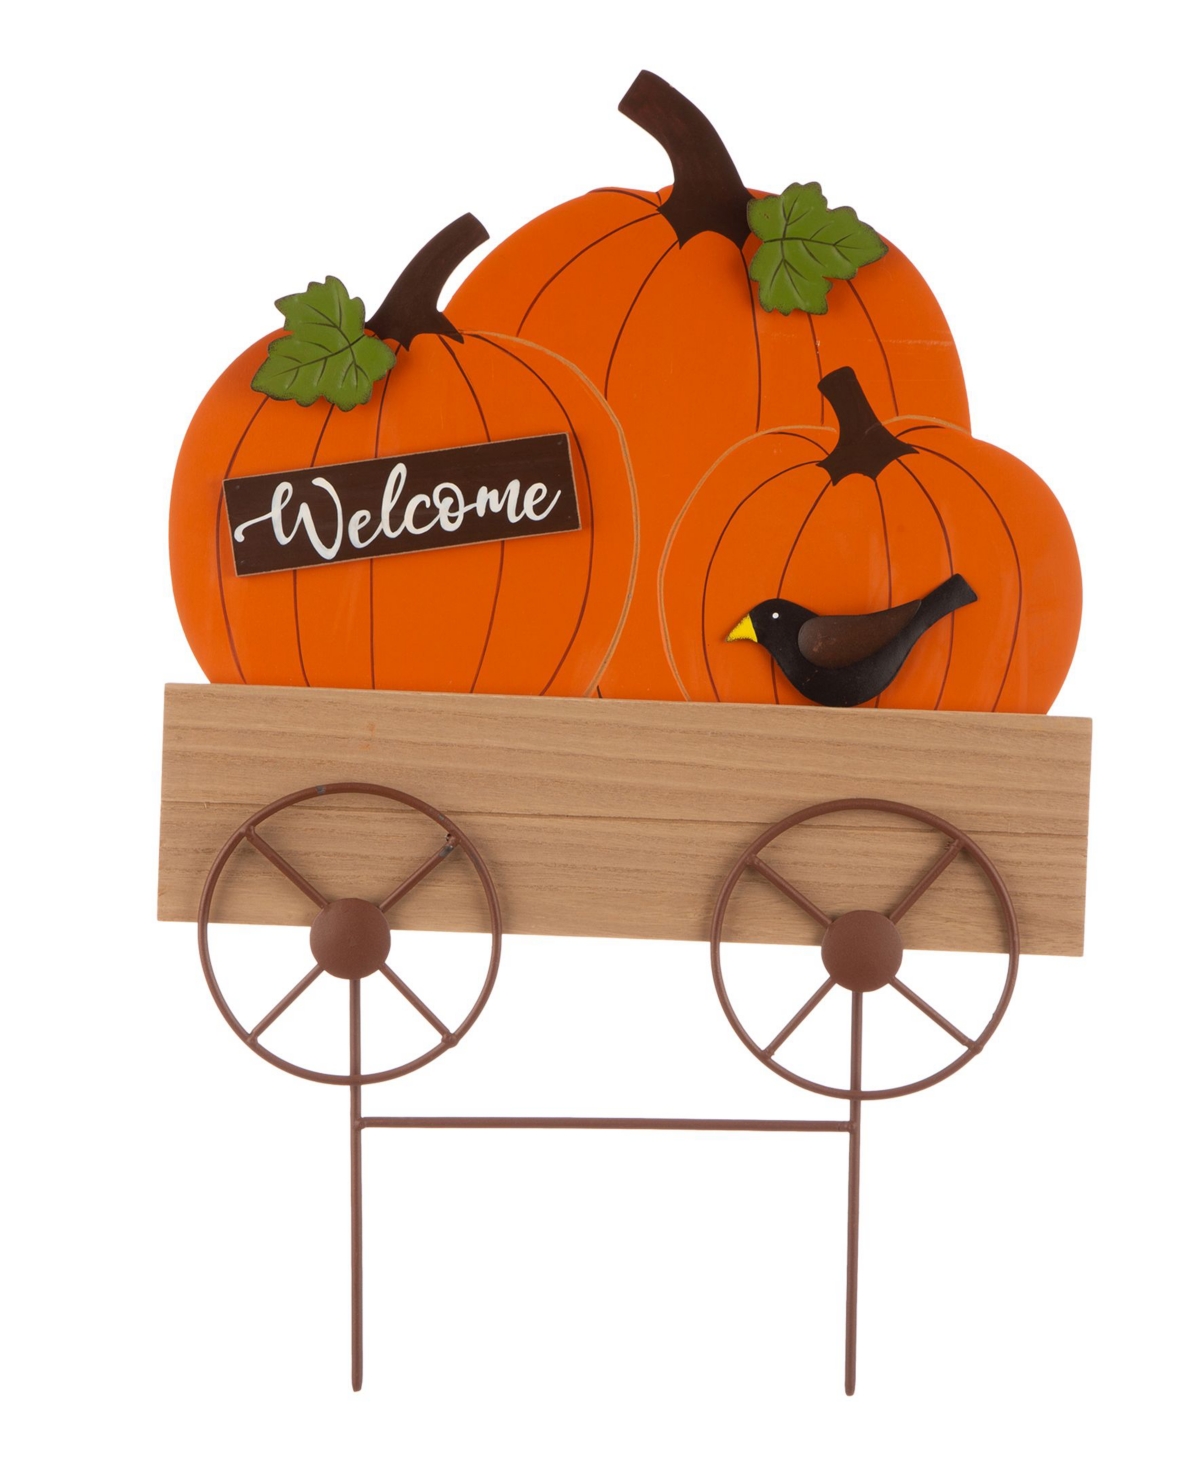 Glitzhome 26.38" Fall Metal And Wooden Pumpkin Cart Yard Stake Or Hanging Decor In Multi